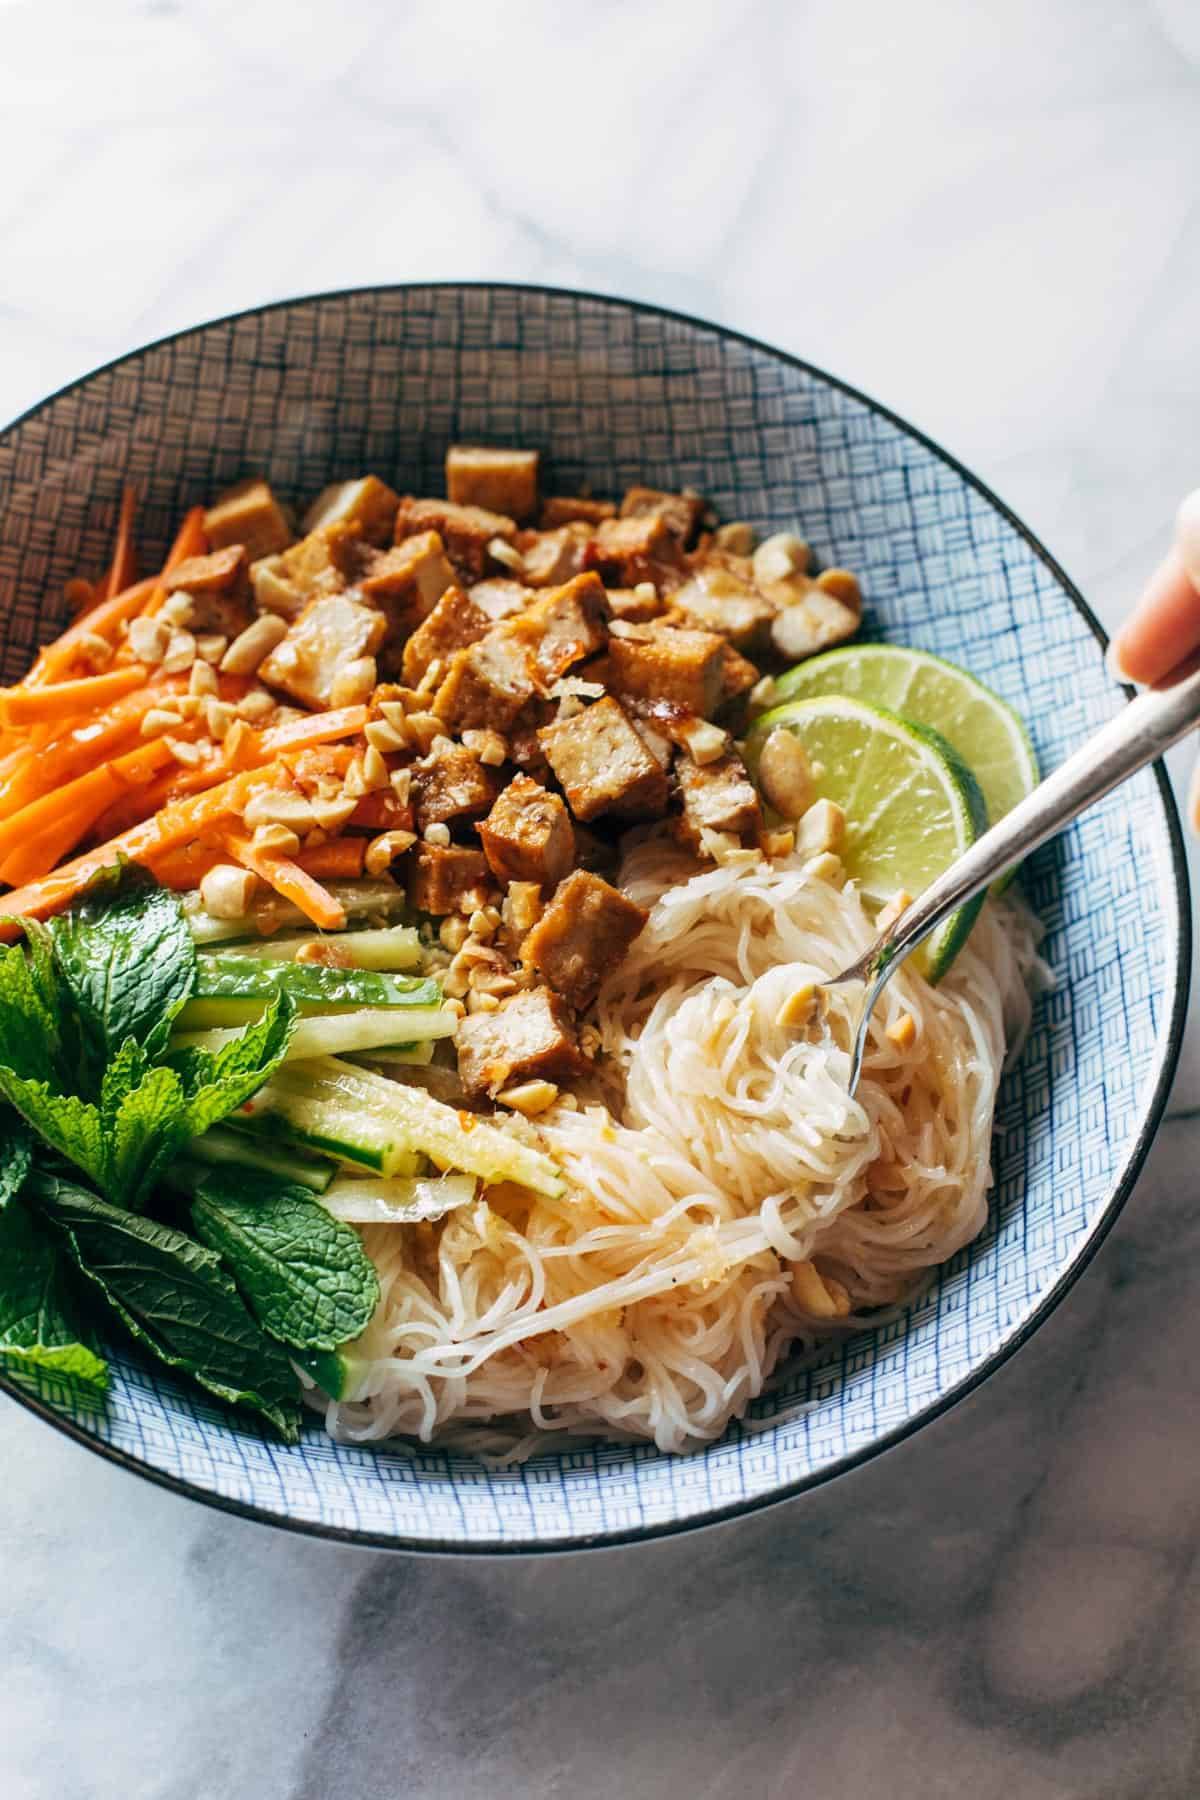 Vermicelli salad in a bowl with tofu and herbs.